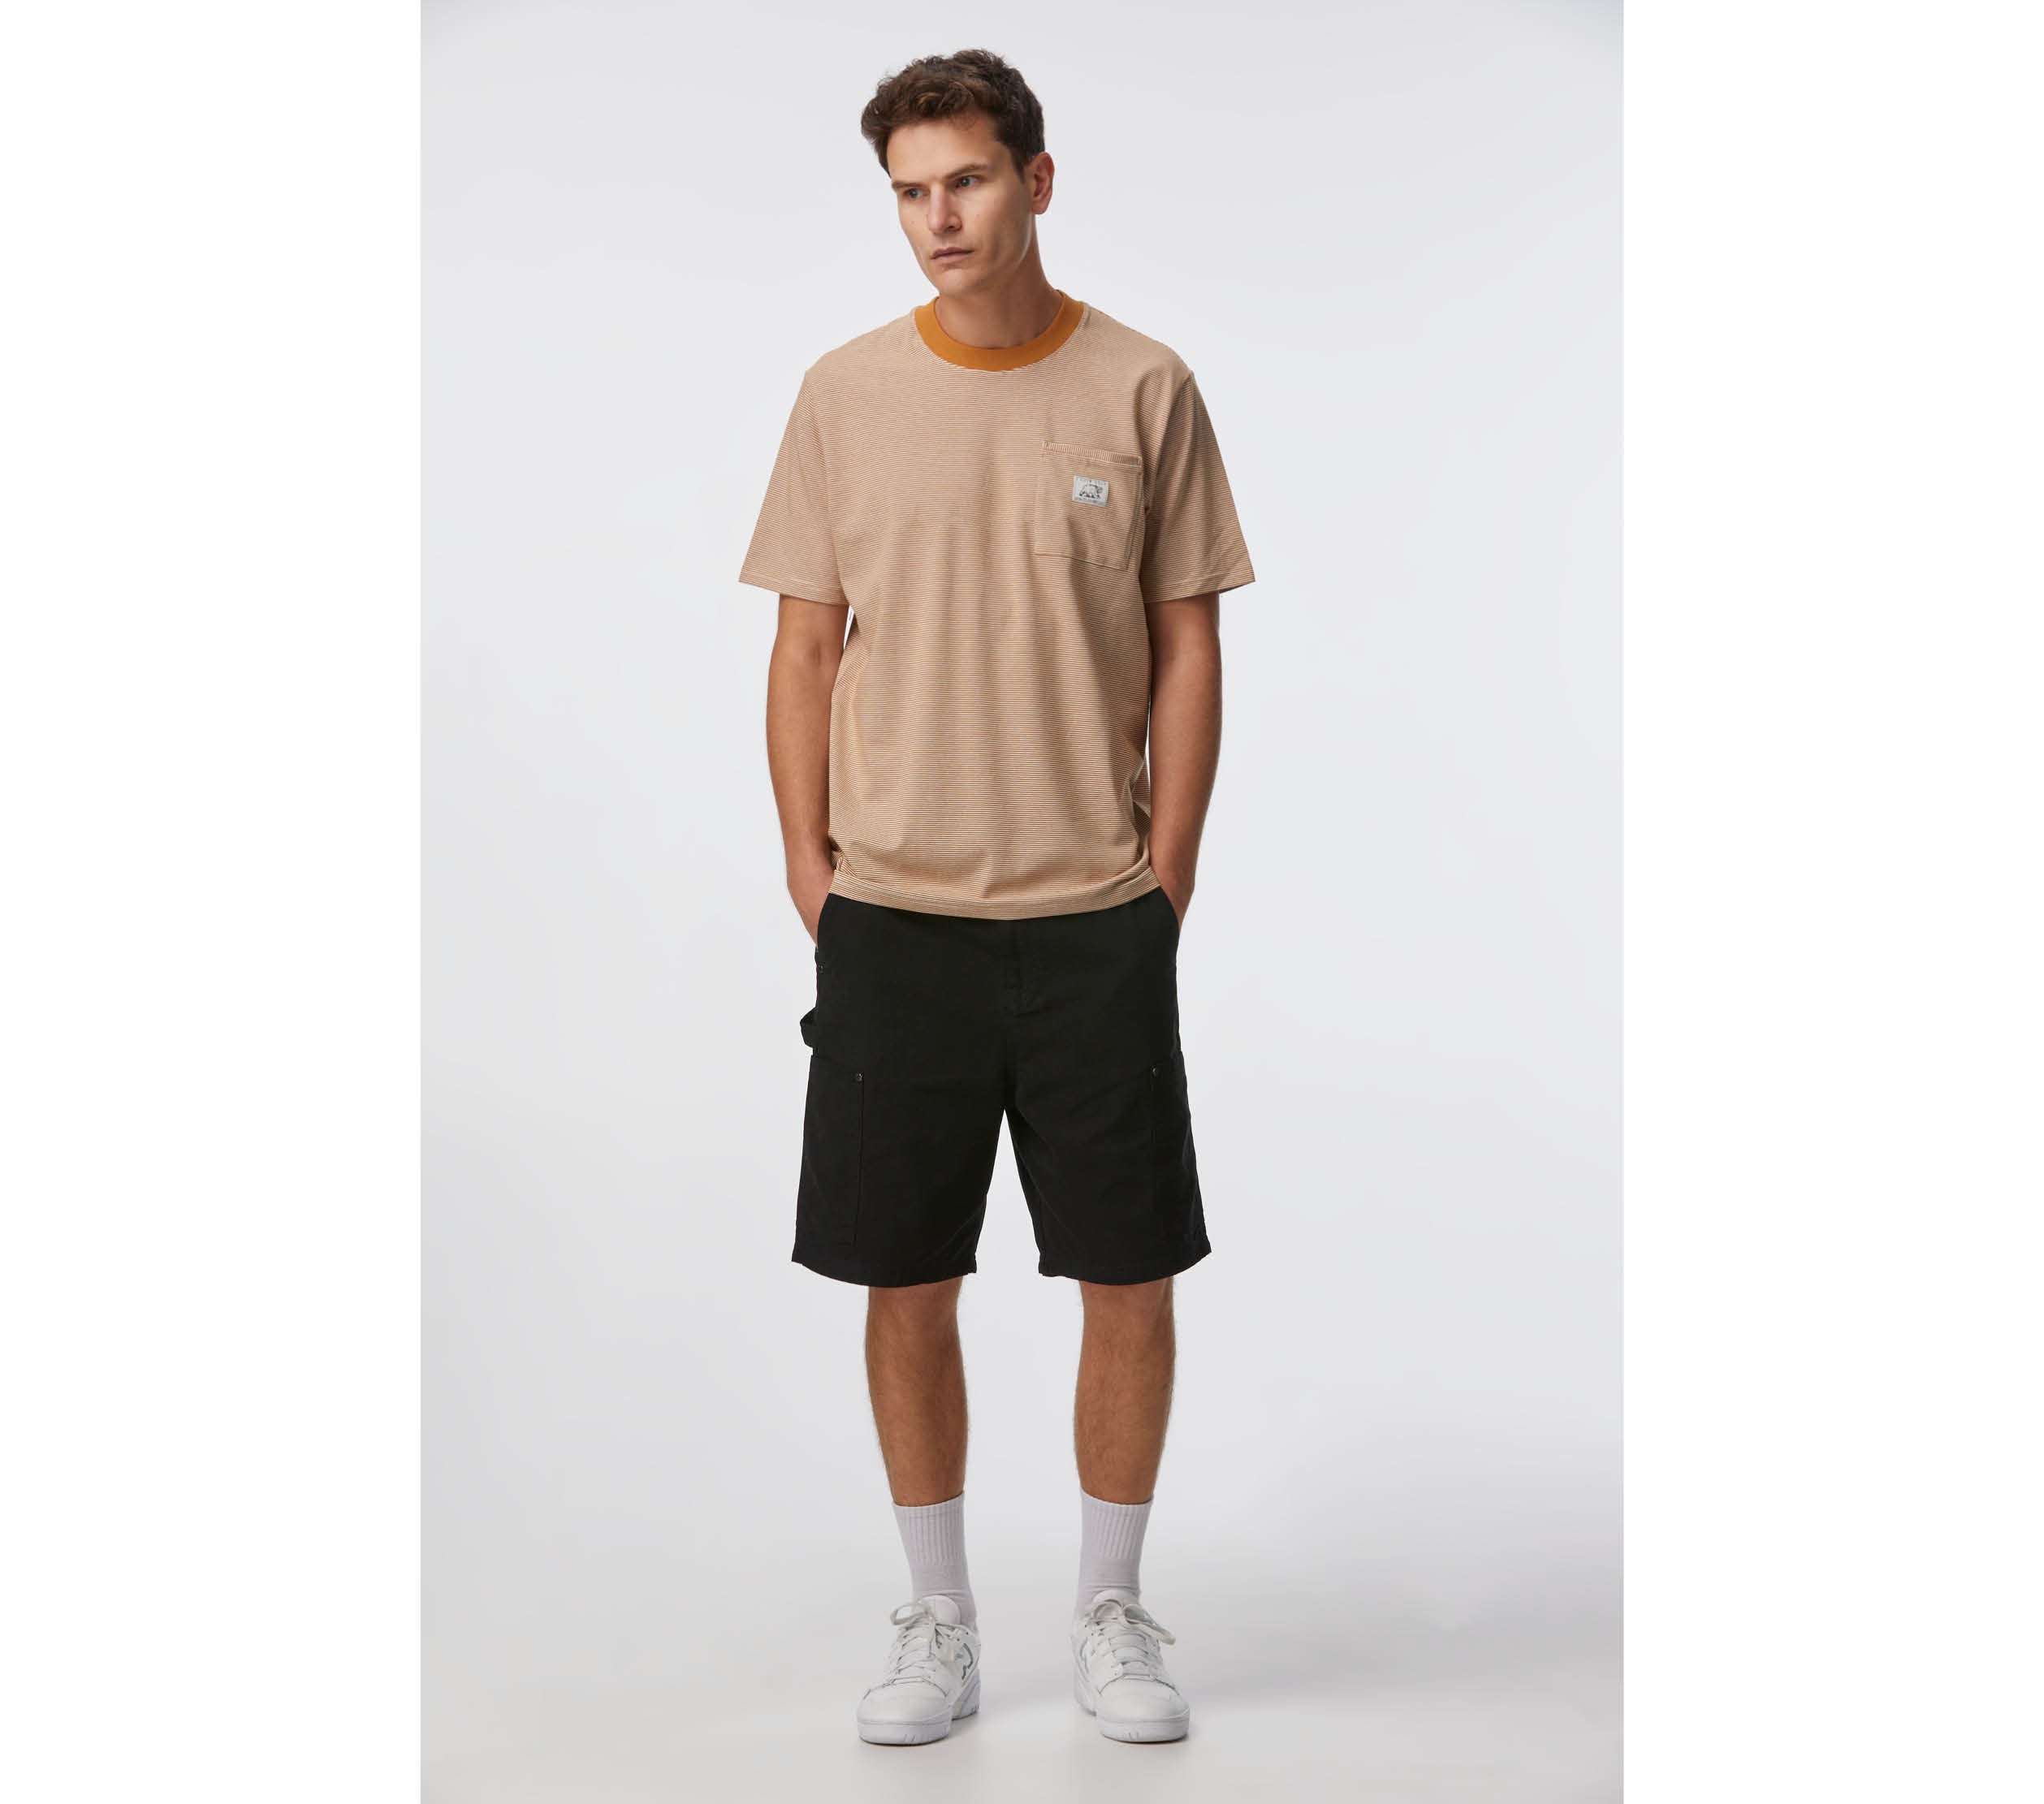 Stripe Pocket Chester Tee - Off White/Toffee